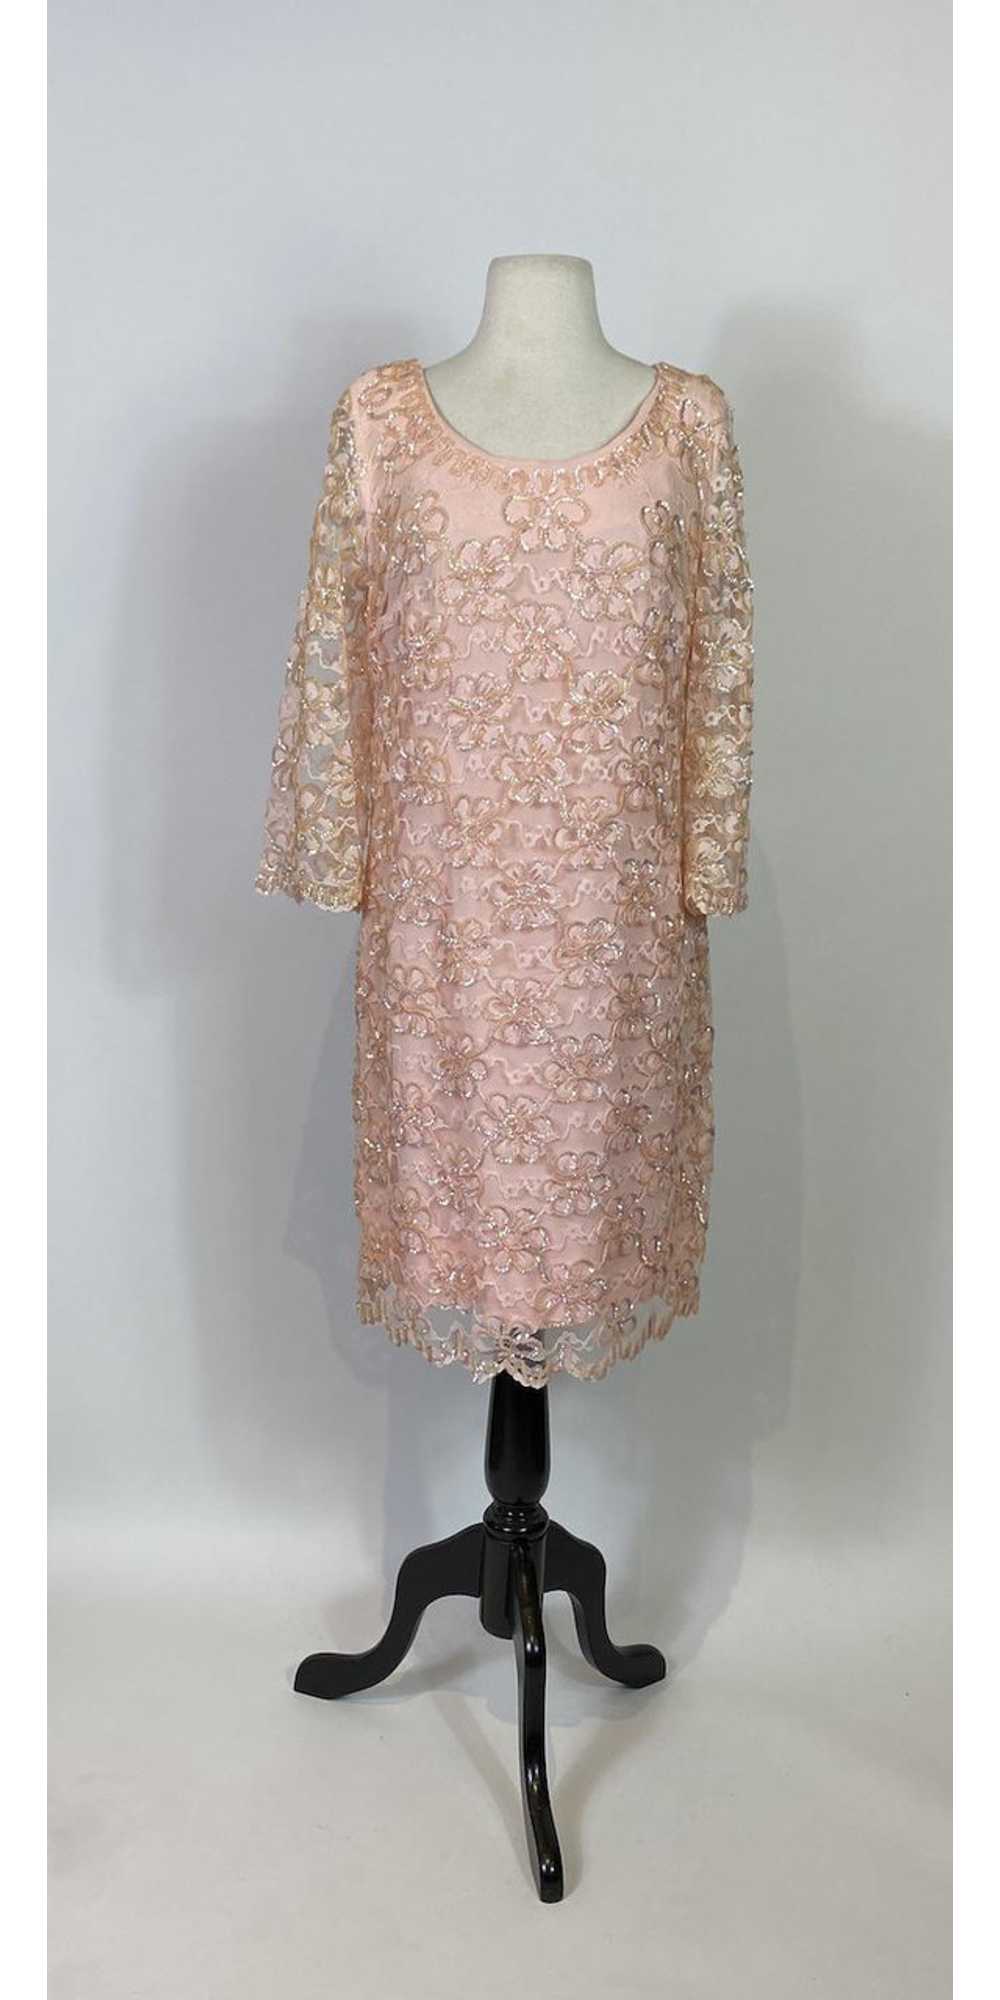 1960s Jr. Theme Pink Sequin and Lace Shift Dress - image 1